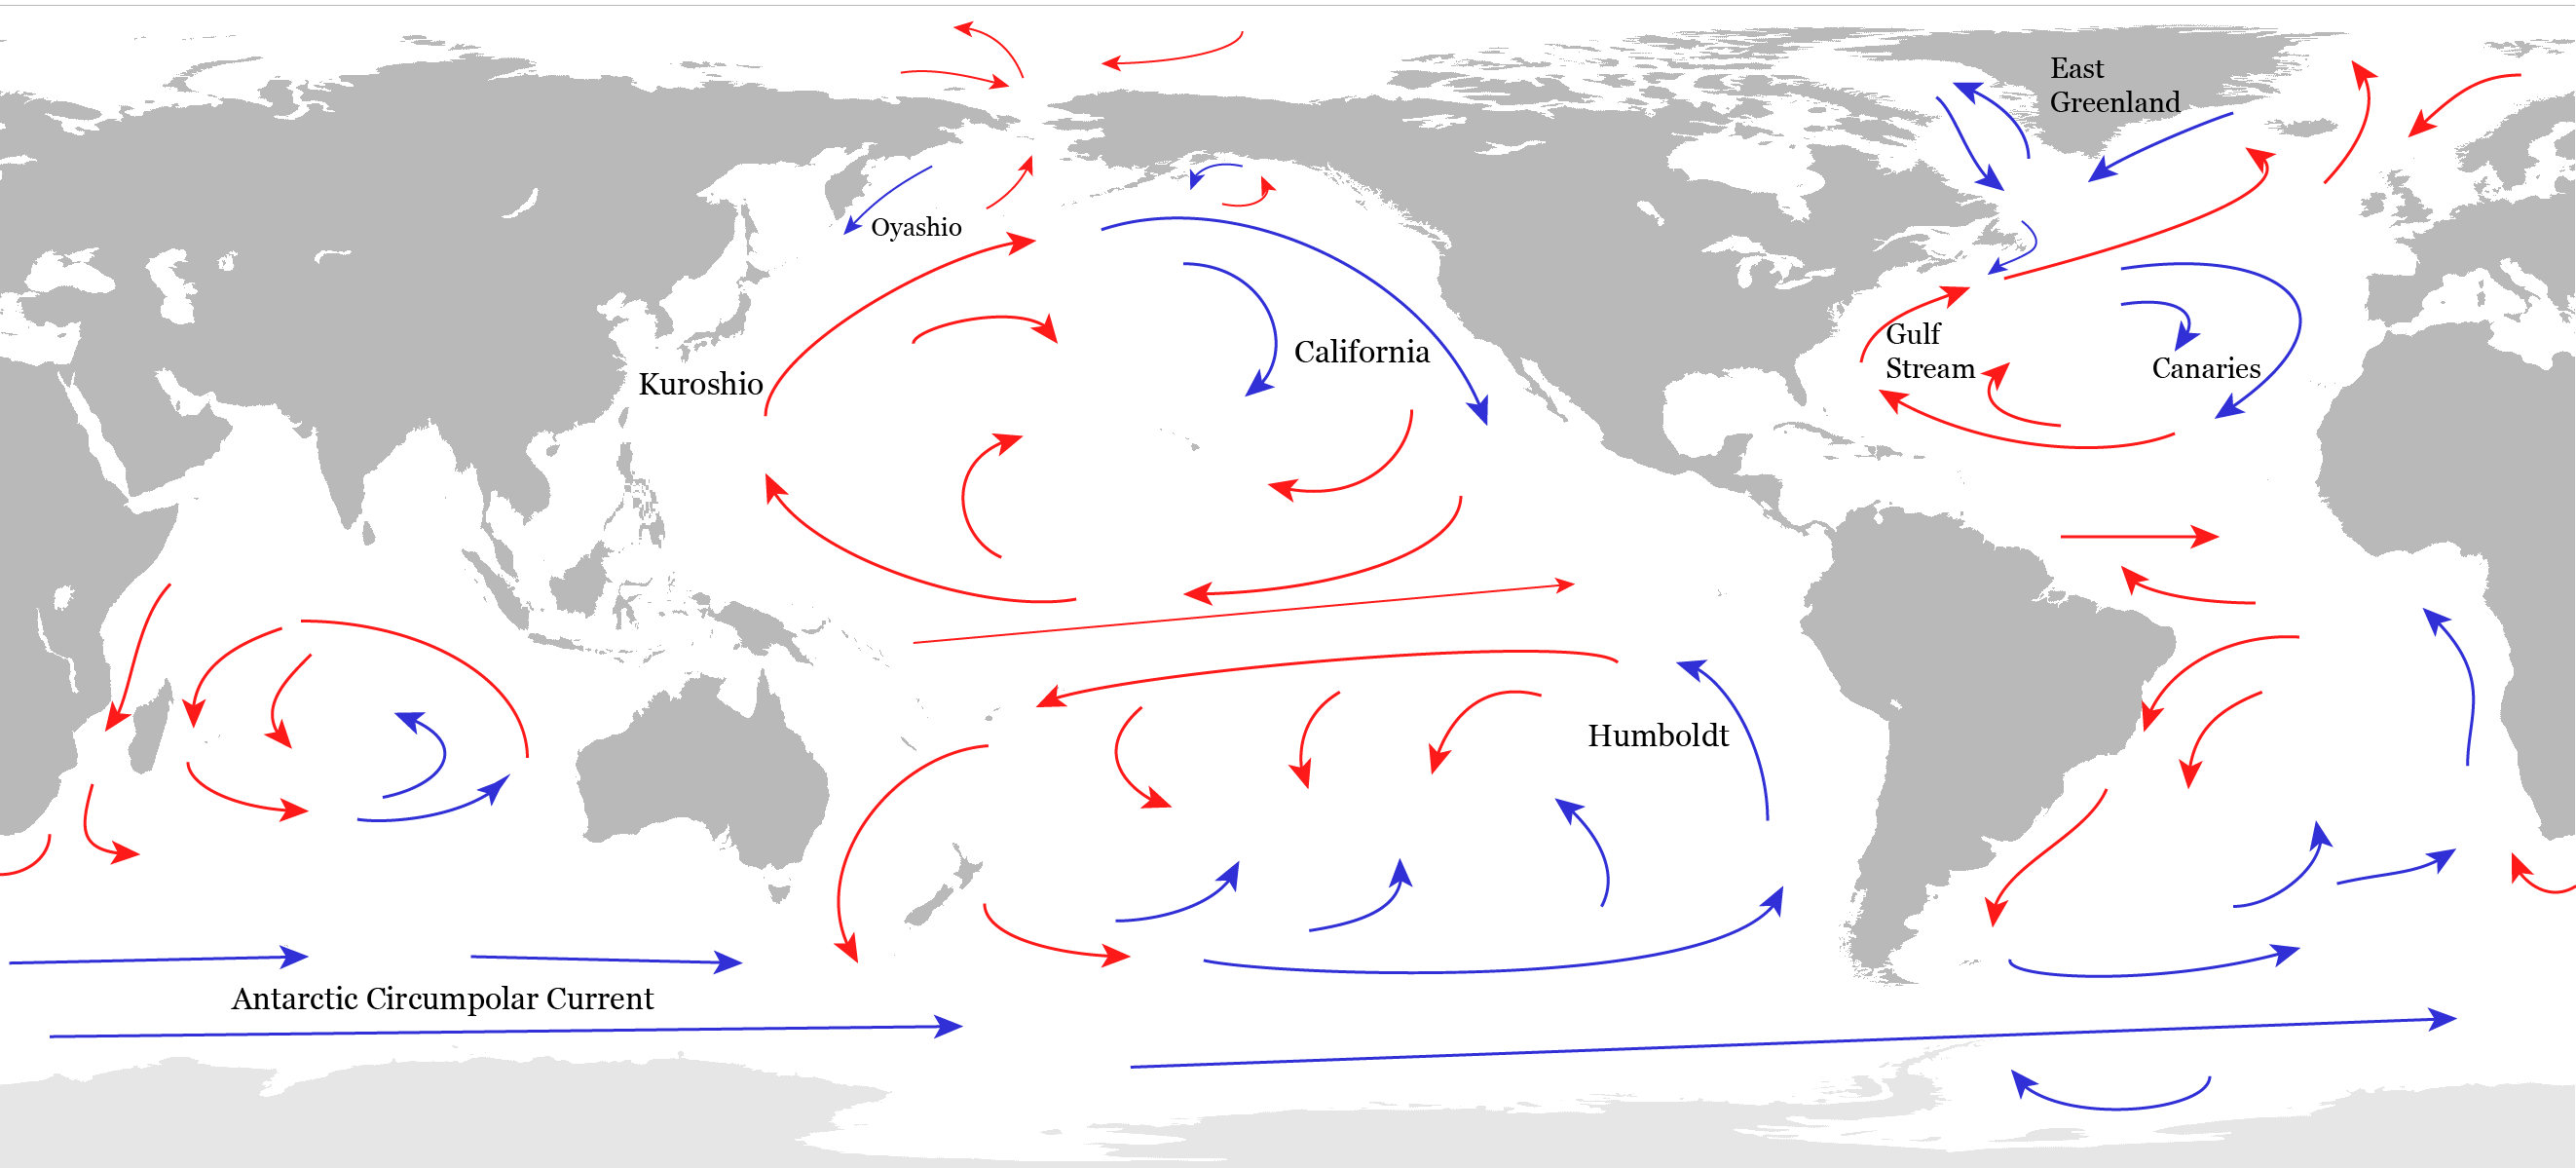 Sketch of the Surface Circulation of the Ocean. After Peixoto and Oort (1992).